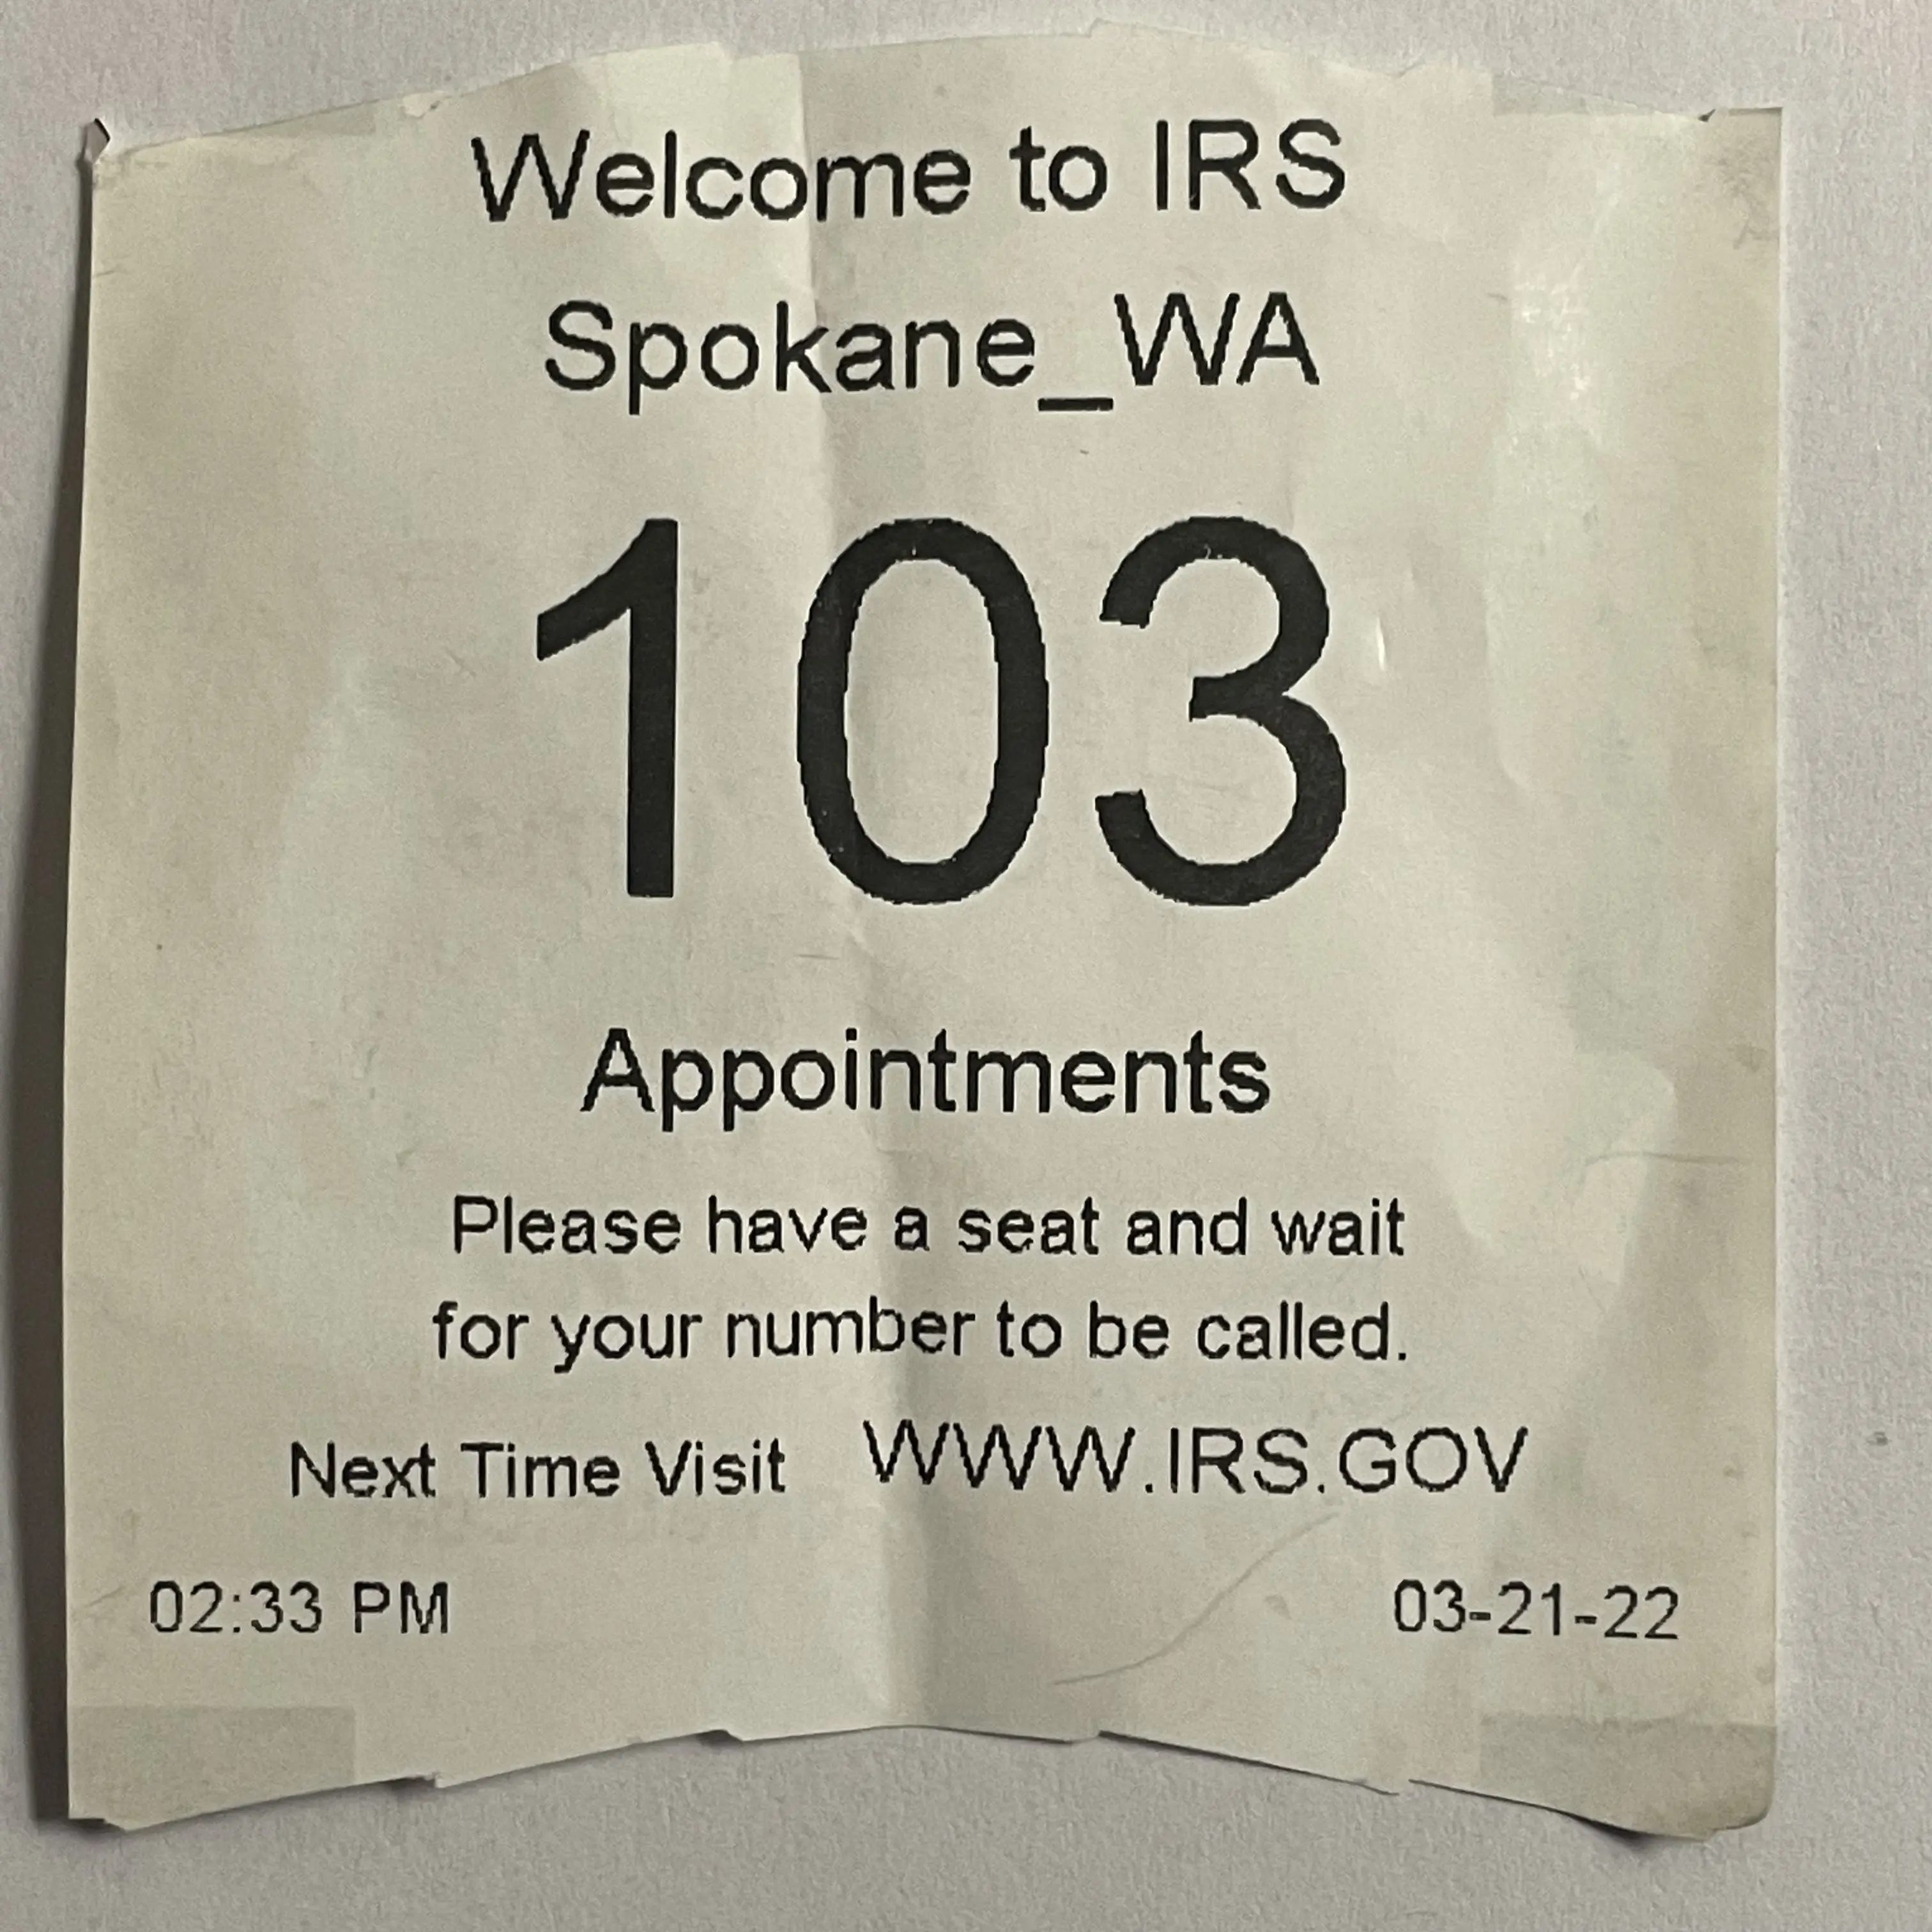 Welcome to IRS, Spokane, WA. Please have a seat and wait for your number to be called.